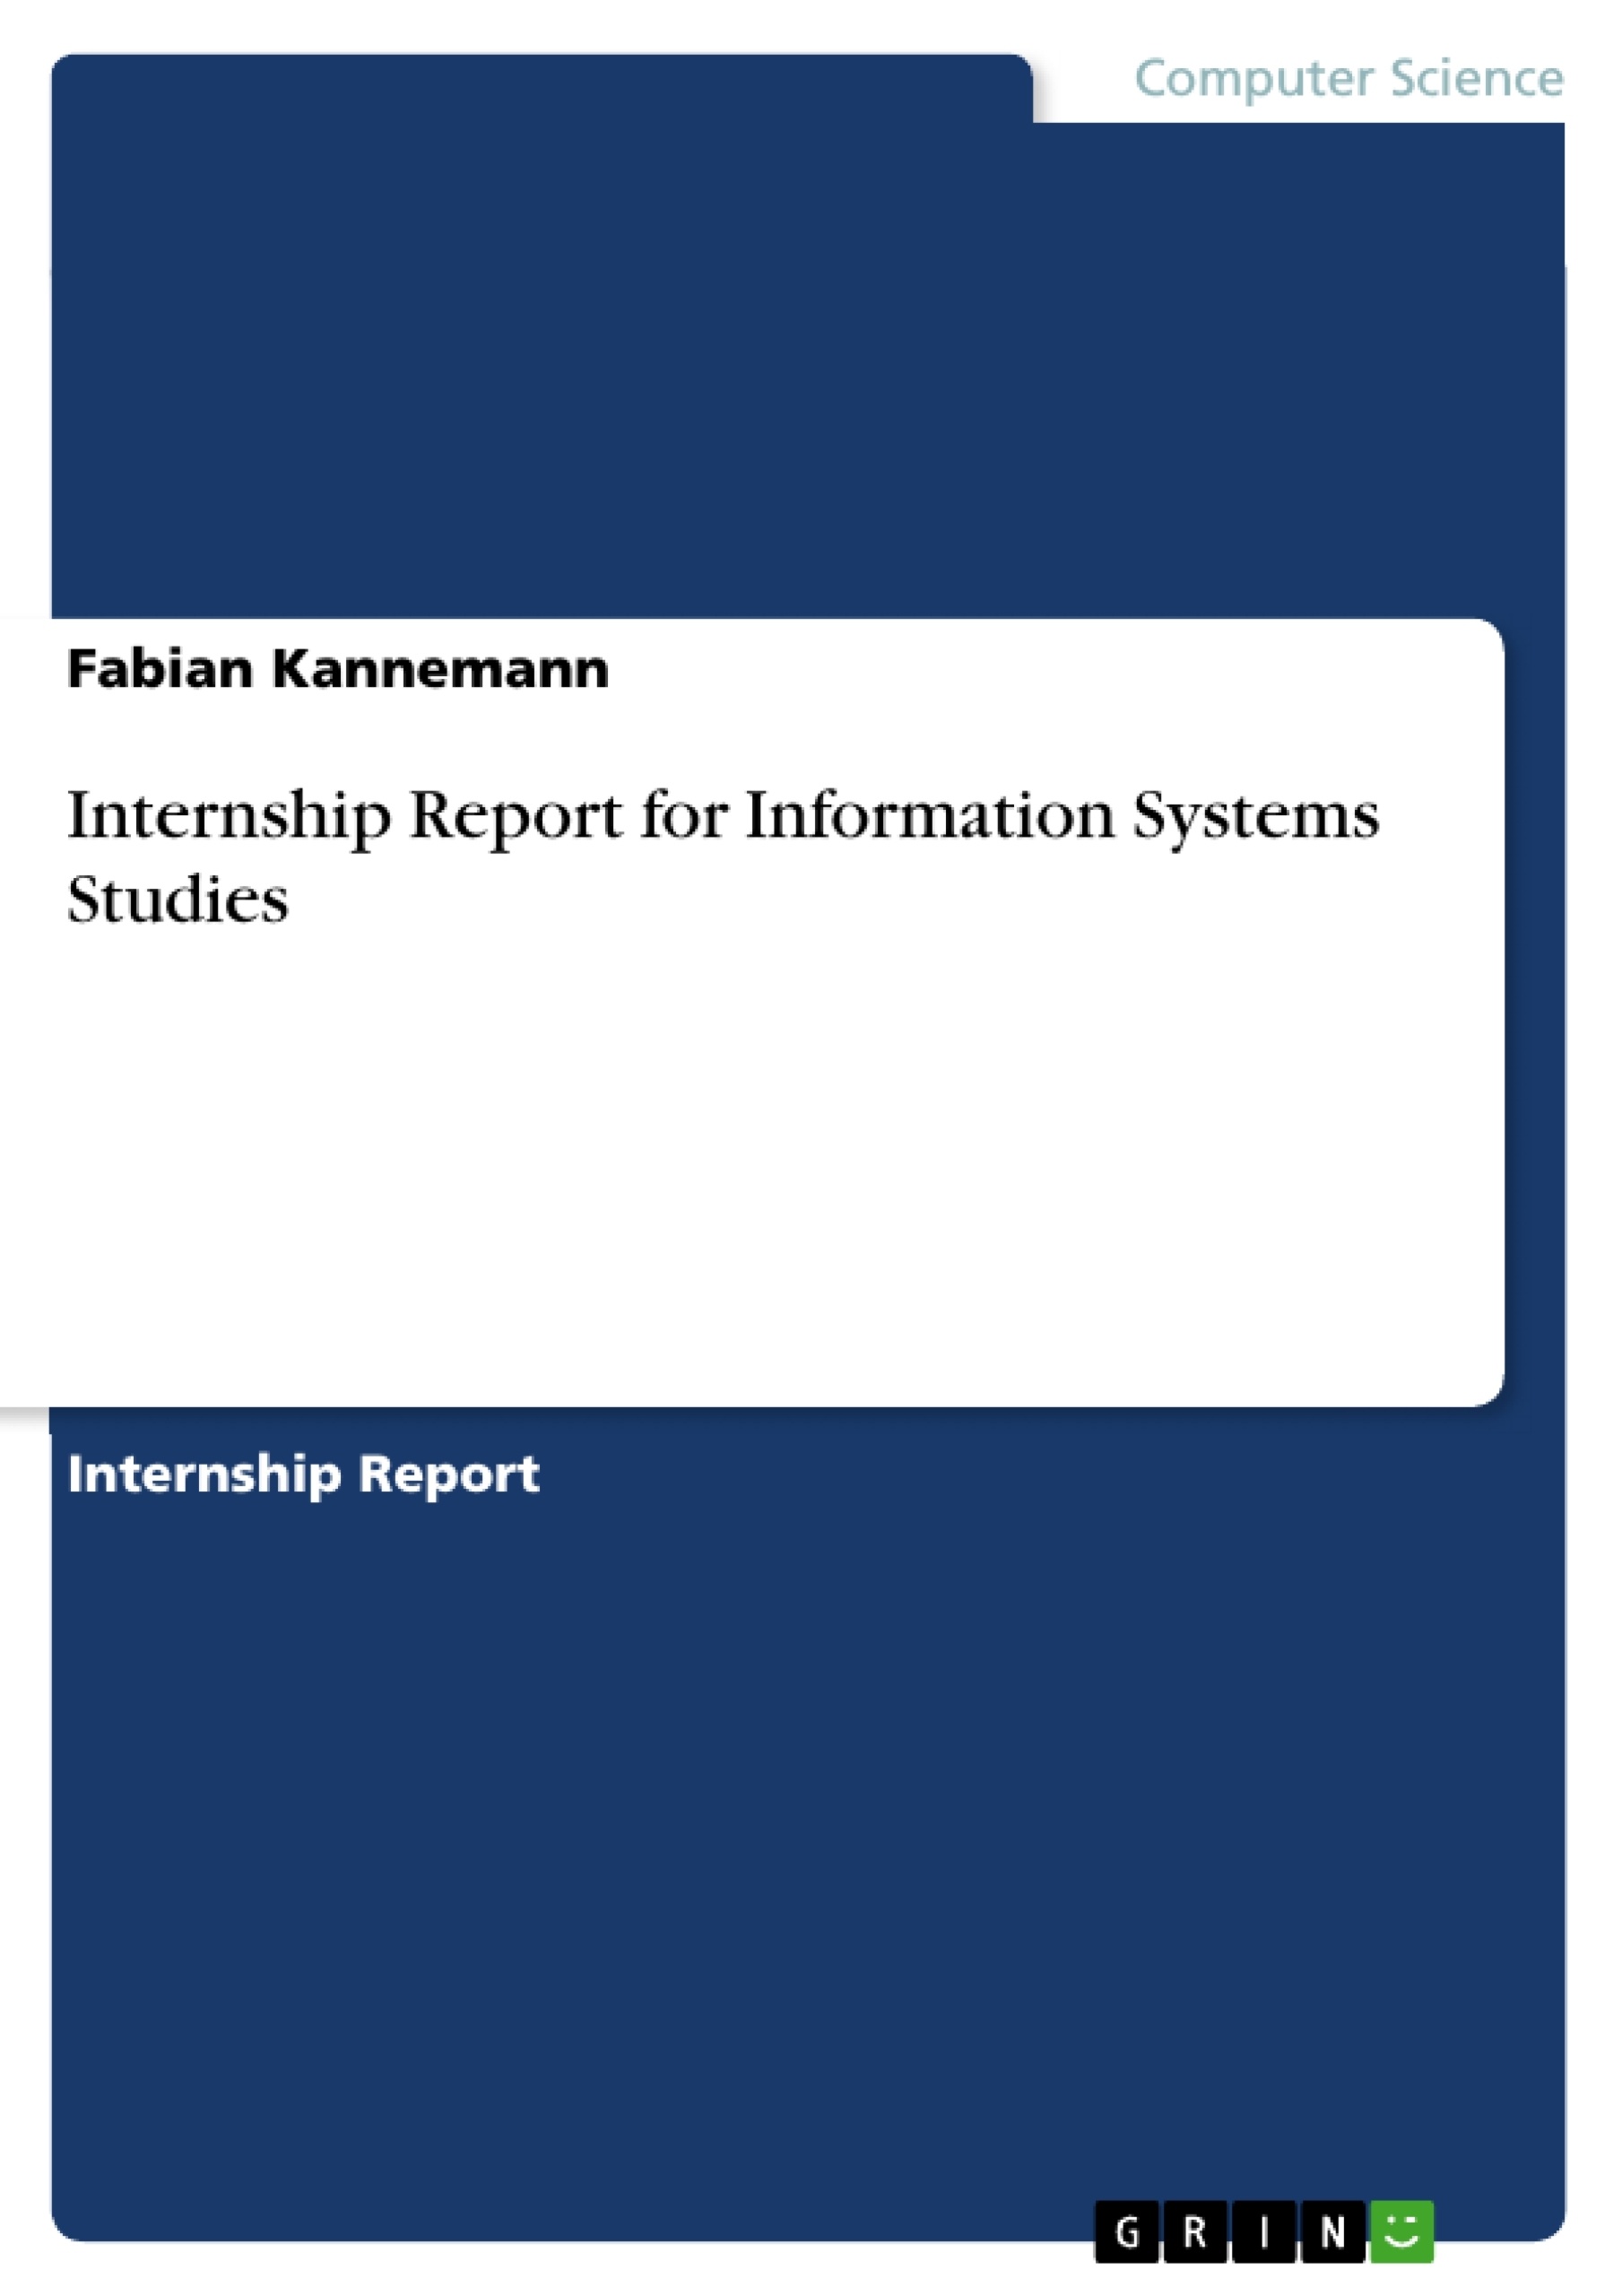 Title: Internship Report for Information Systems Studies